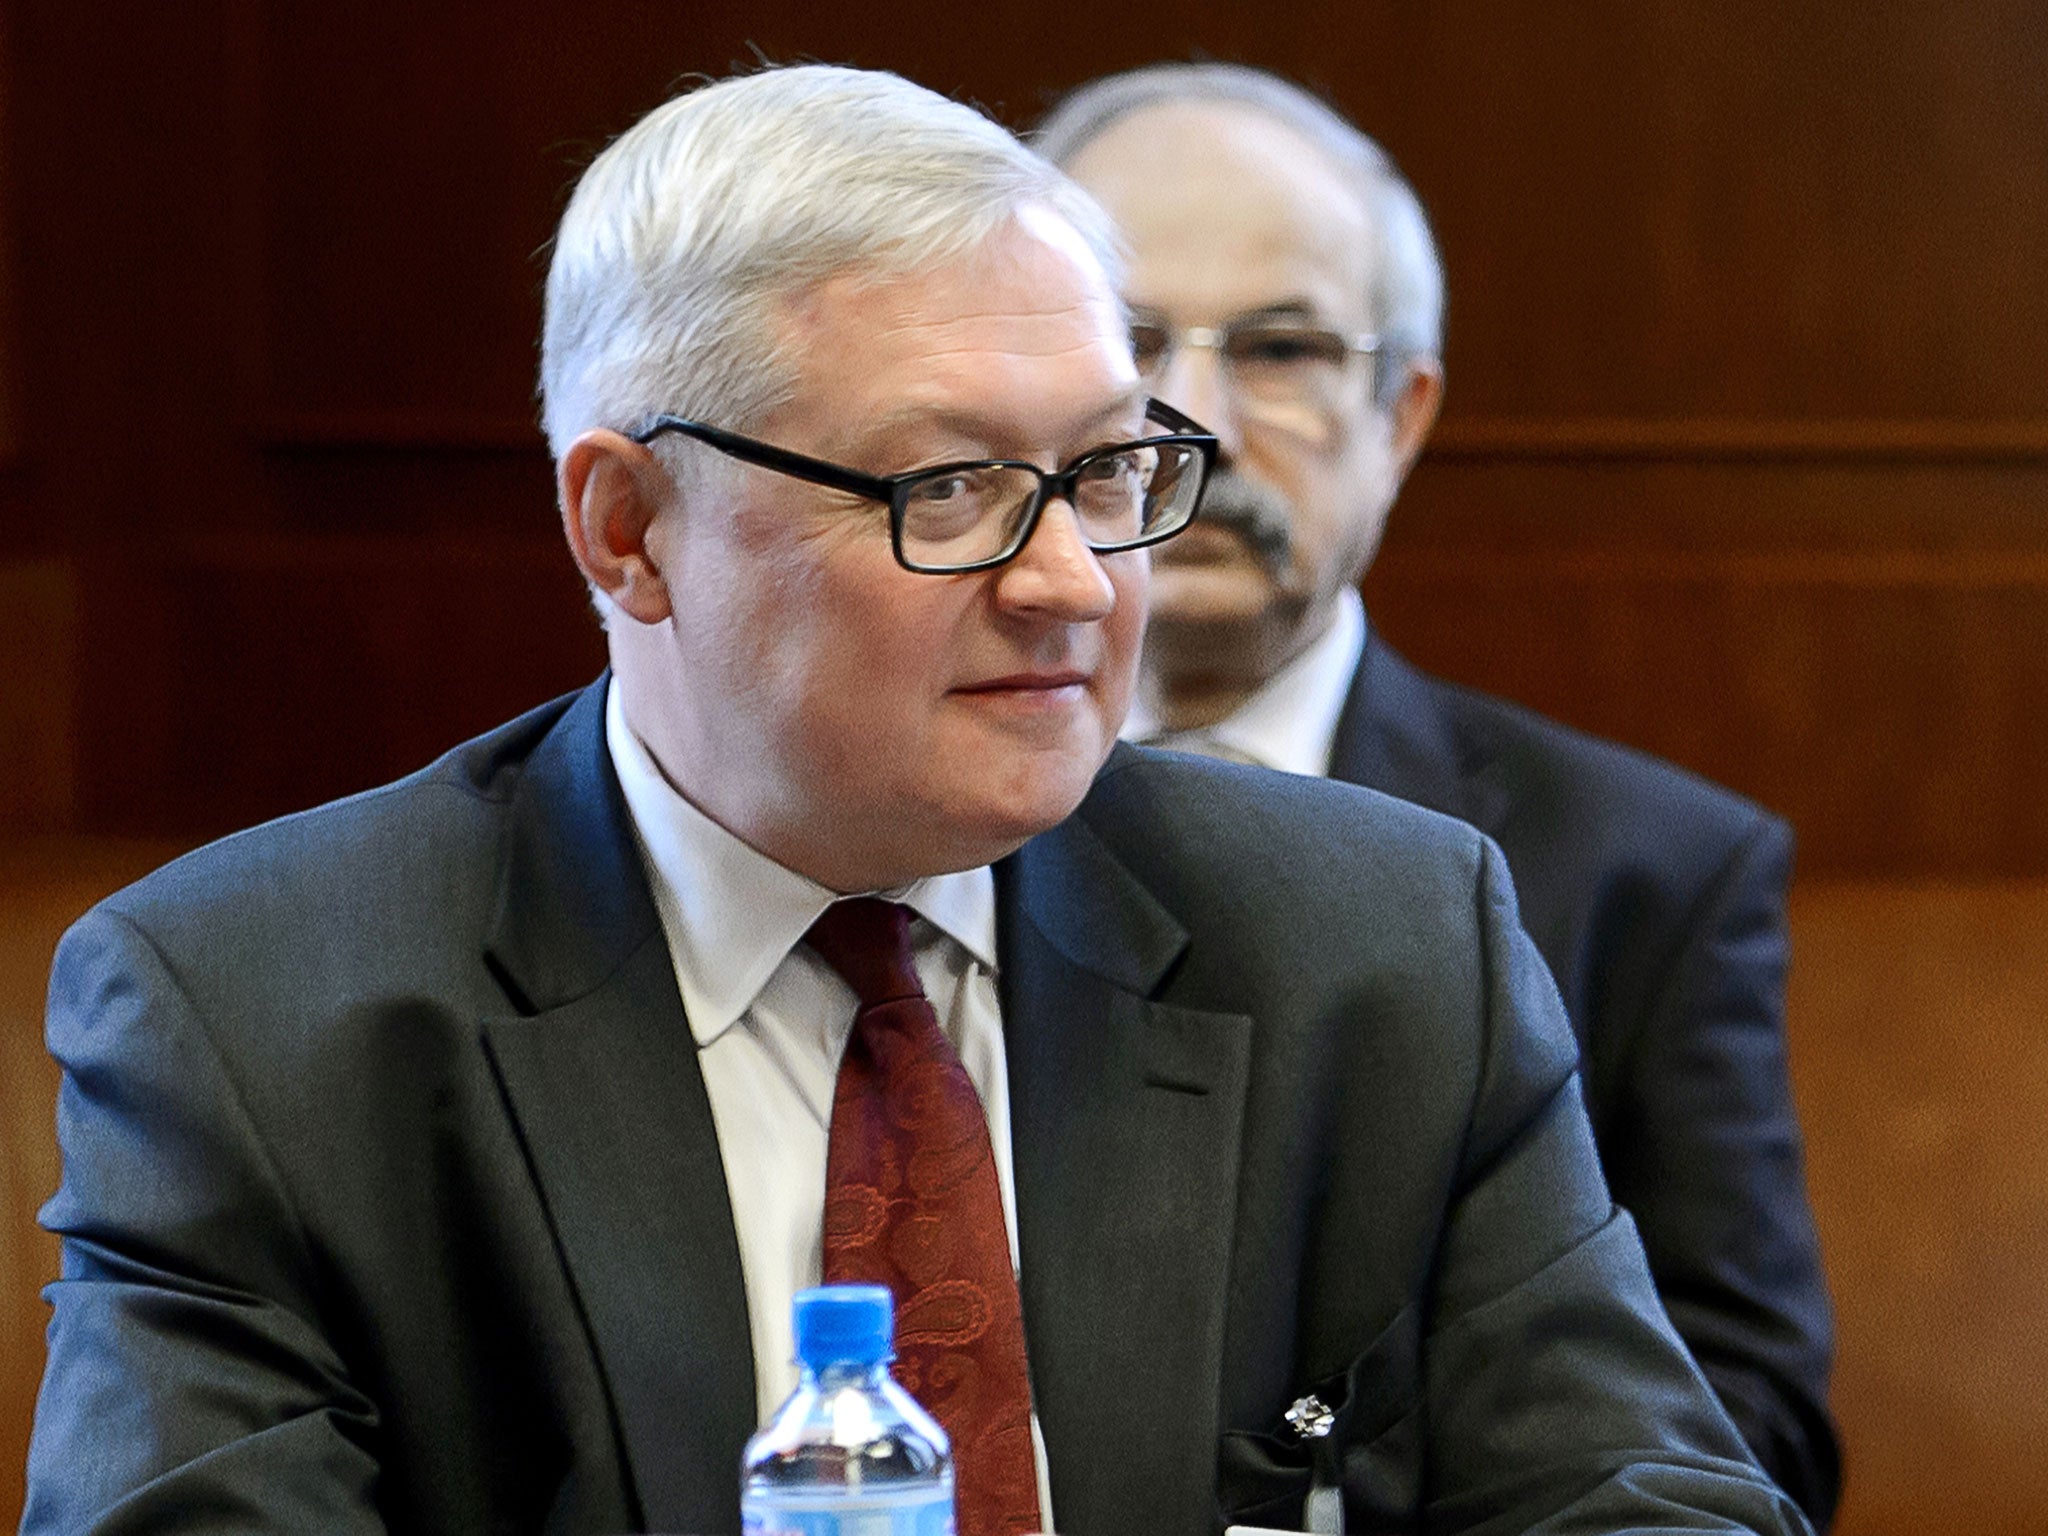 Russian Deputy Foreign Minister Sergei Ryabkov looks on at the start of two days of closed-door nuclear talks on October 15, 2013 at the United Nations offices in Geneva.